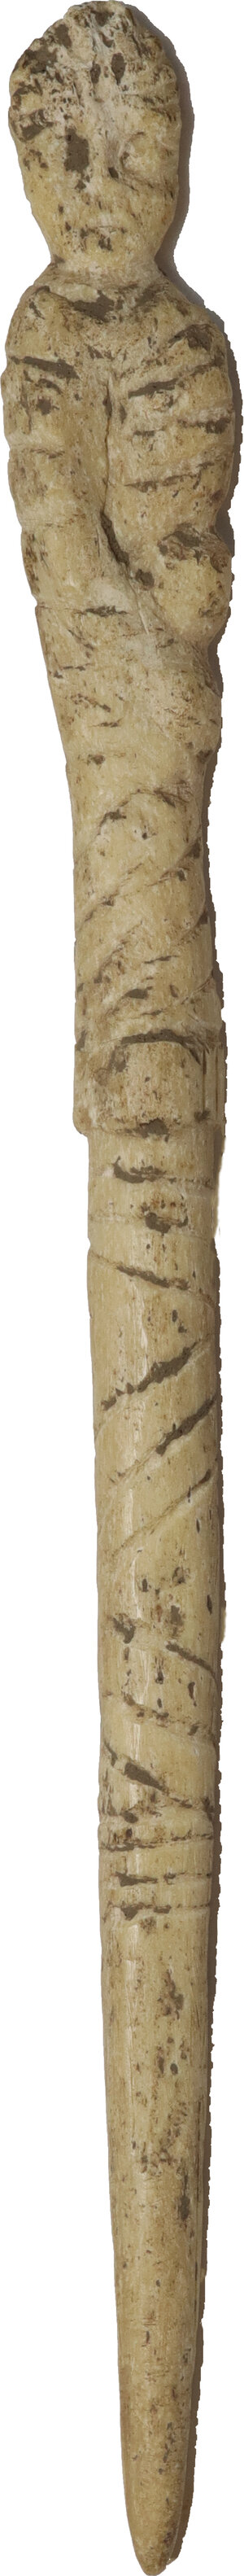 obverse: BONE DRESS NEEDLE  Roman period, c. 3rd century AD.  Fascinating large Roman dress needle made of engraved bone and configured as a female figure. The accessory decoration consists of a series of oblique incised lines.  Lenght: 170 mm